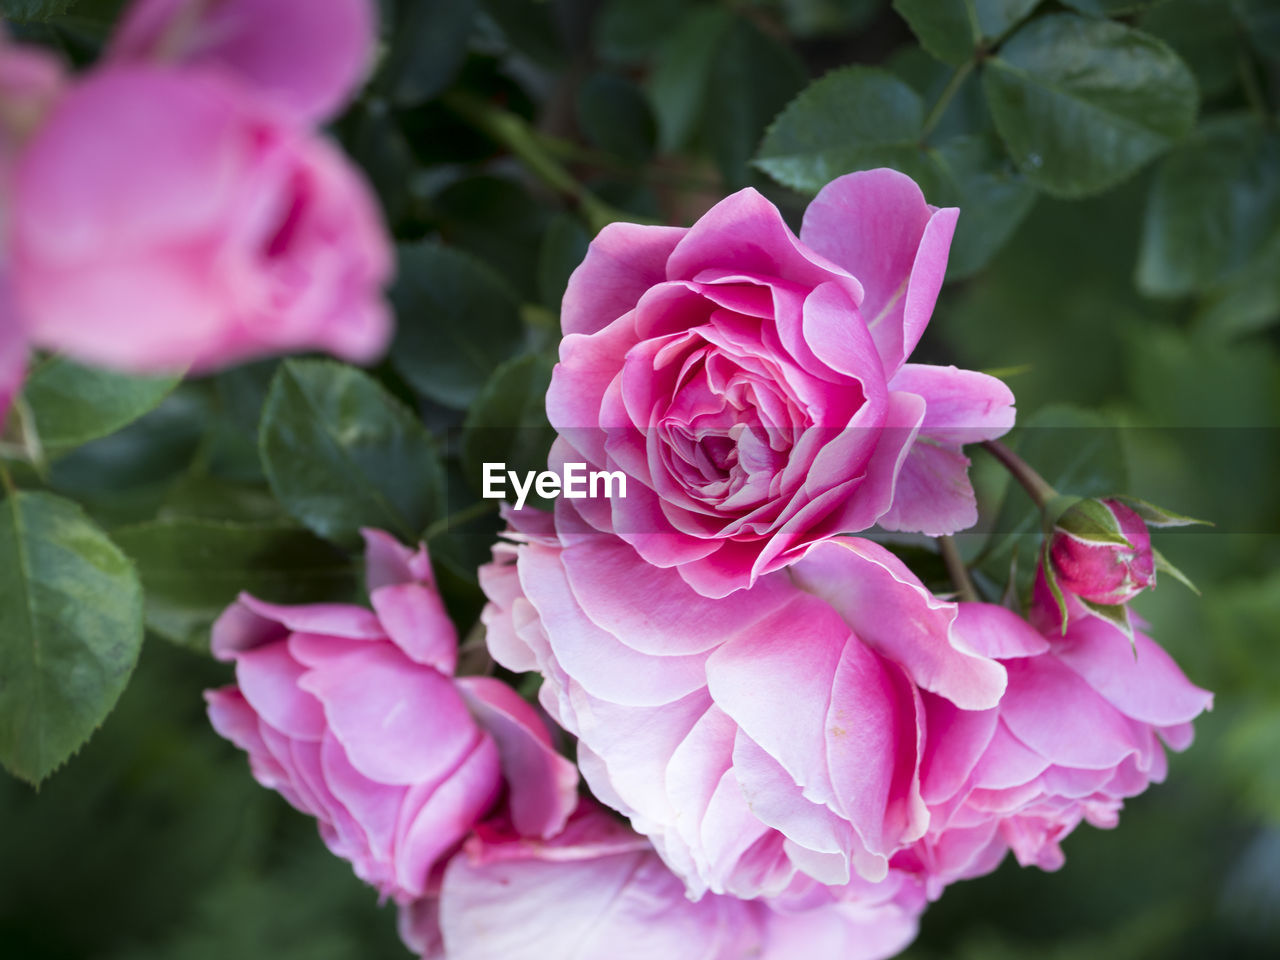 CLOSE-UP OF PINK ROSE WITH PURPLE ROSES